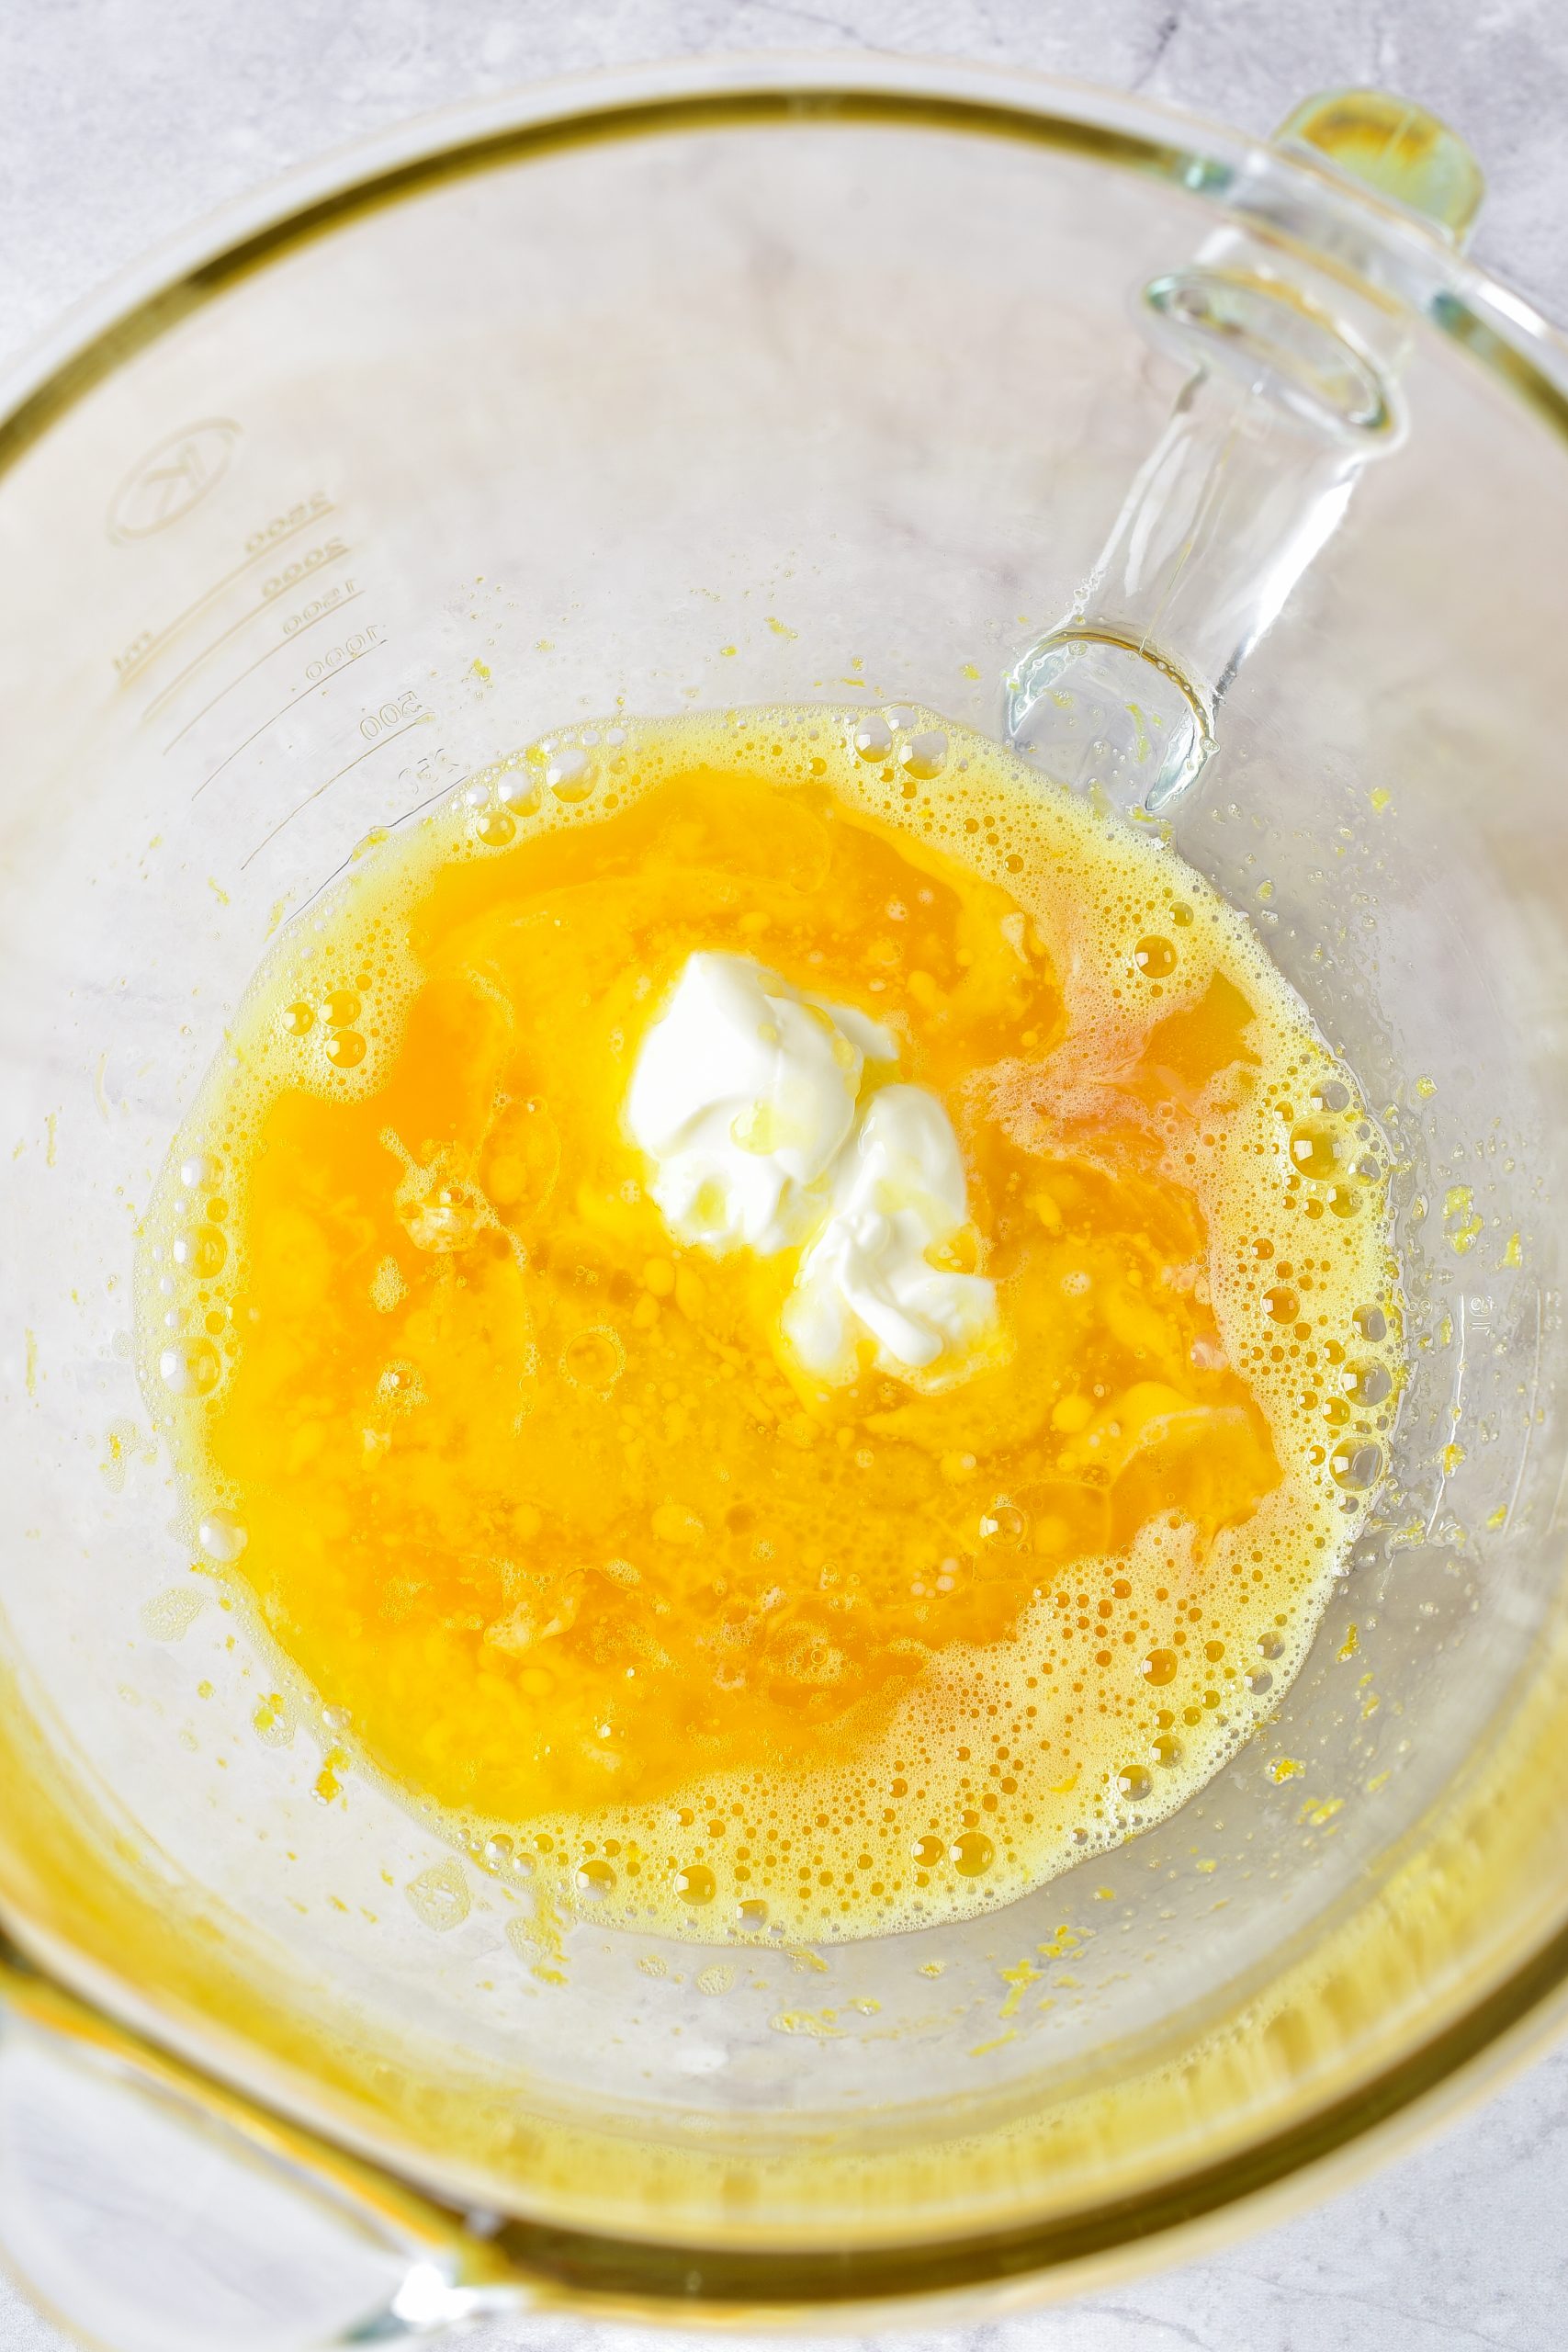 Mix the butter, sour cream, and vanilla into the bowl with the egg mixture, and blend until smooth. 